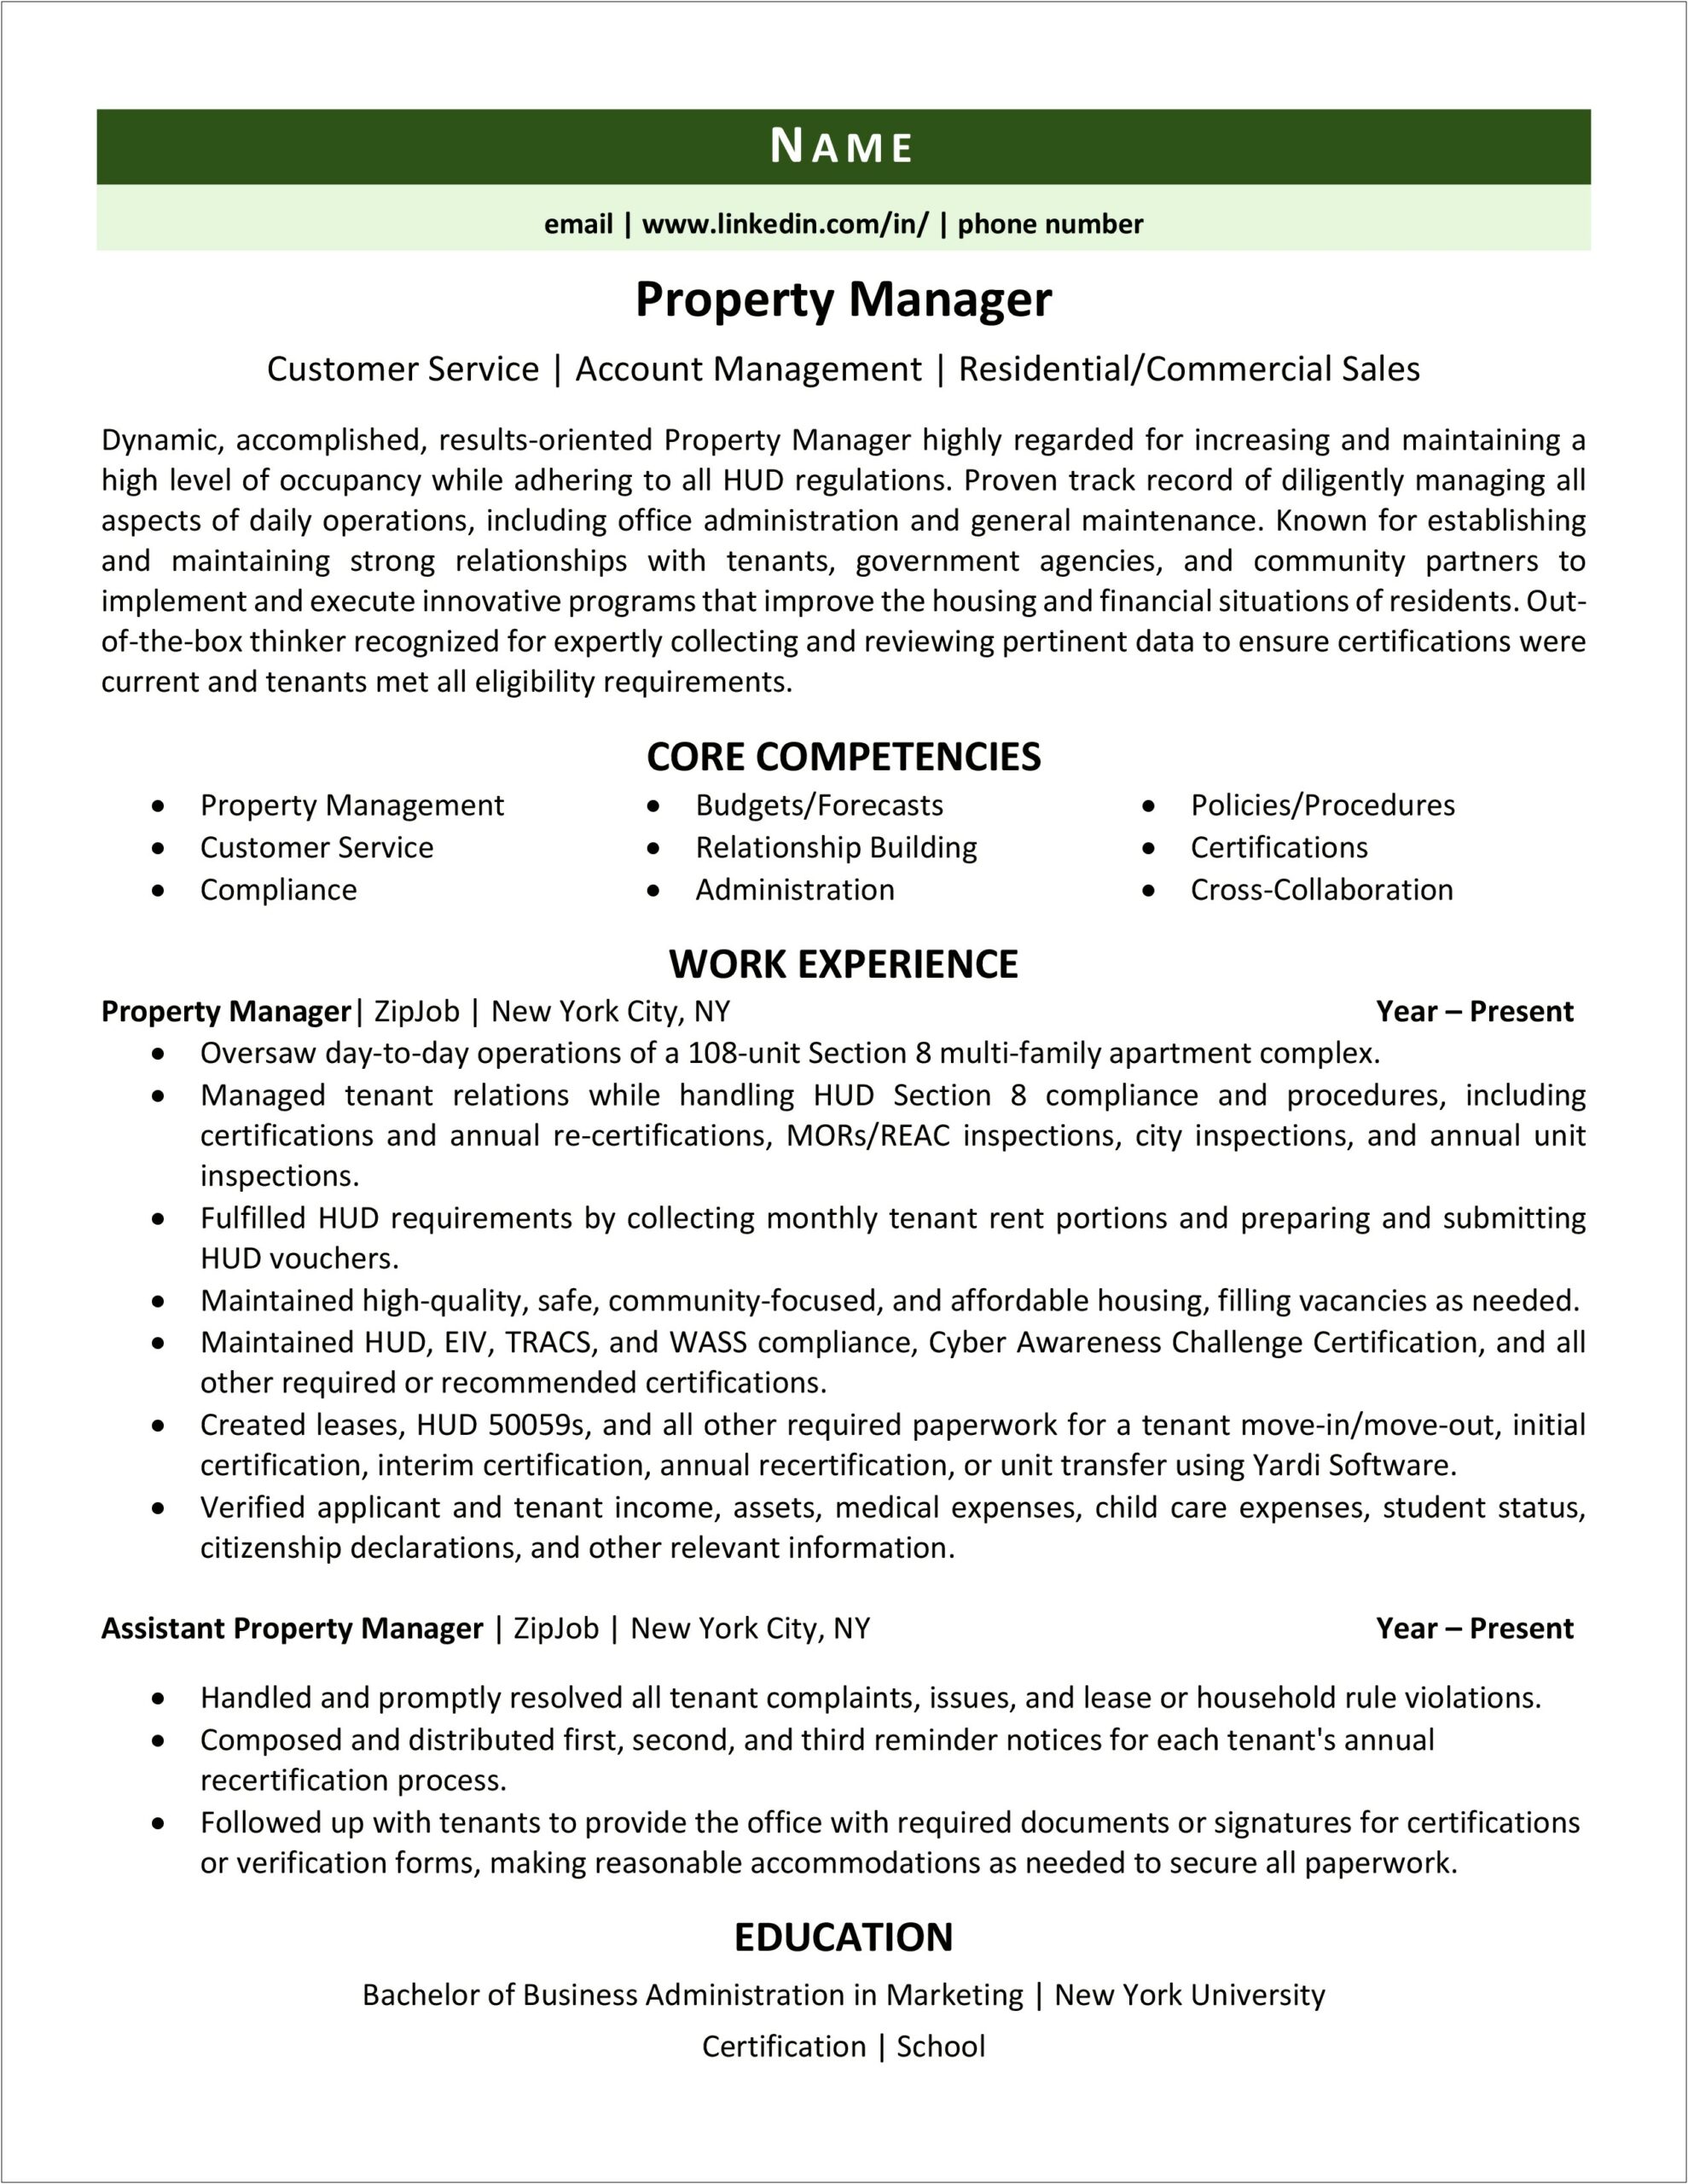 Resume Examples For Assistant Property Manager